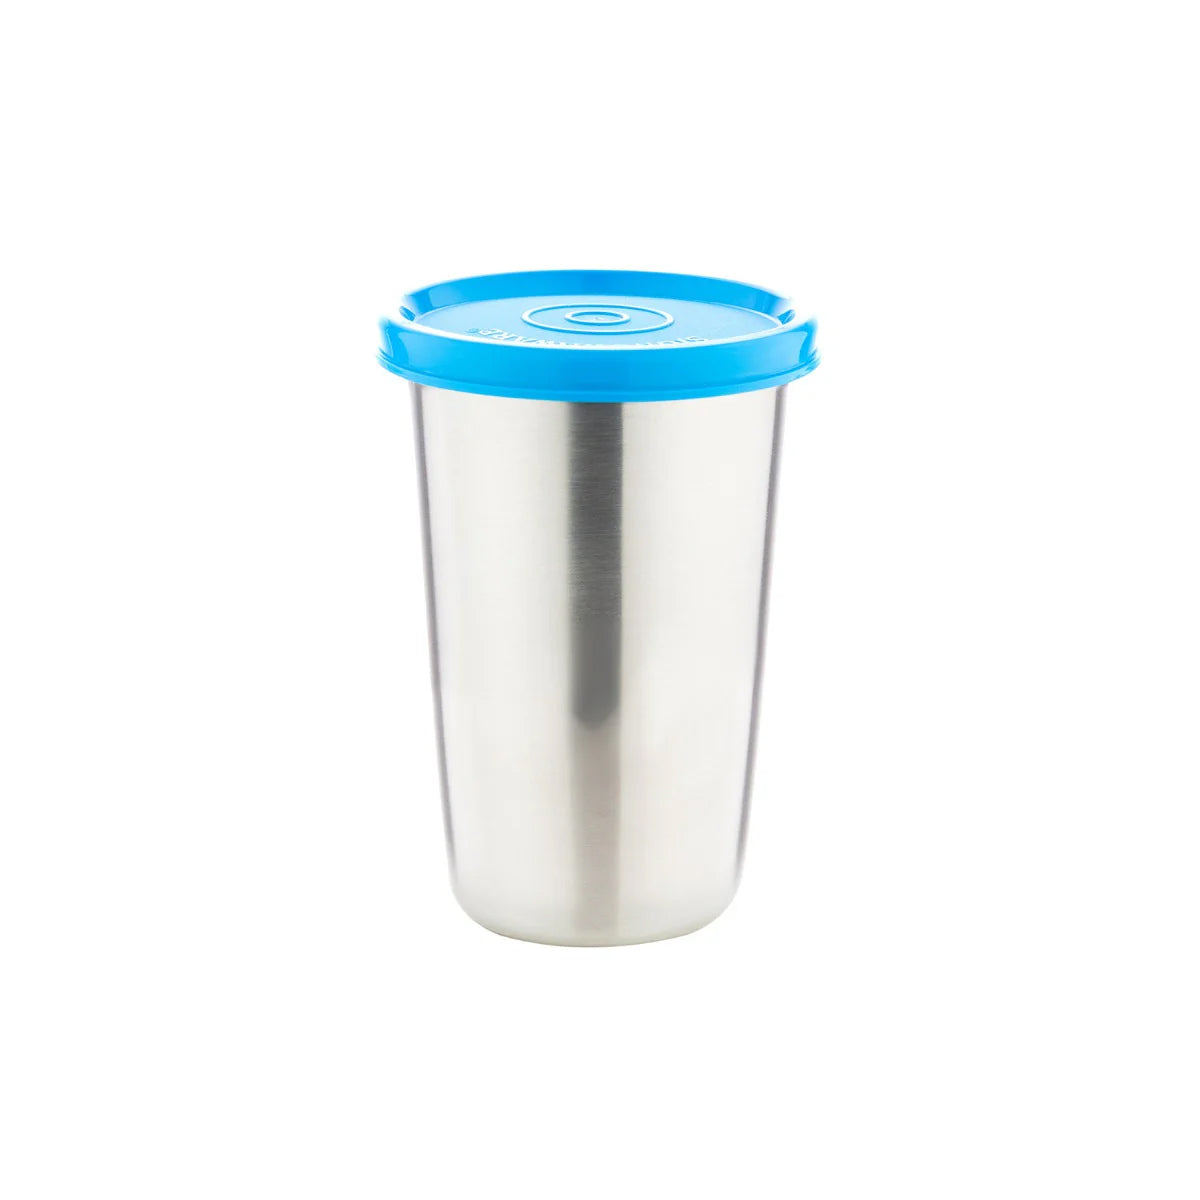 Signoraware Stainless Steel Tumbler with Lid